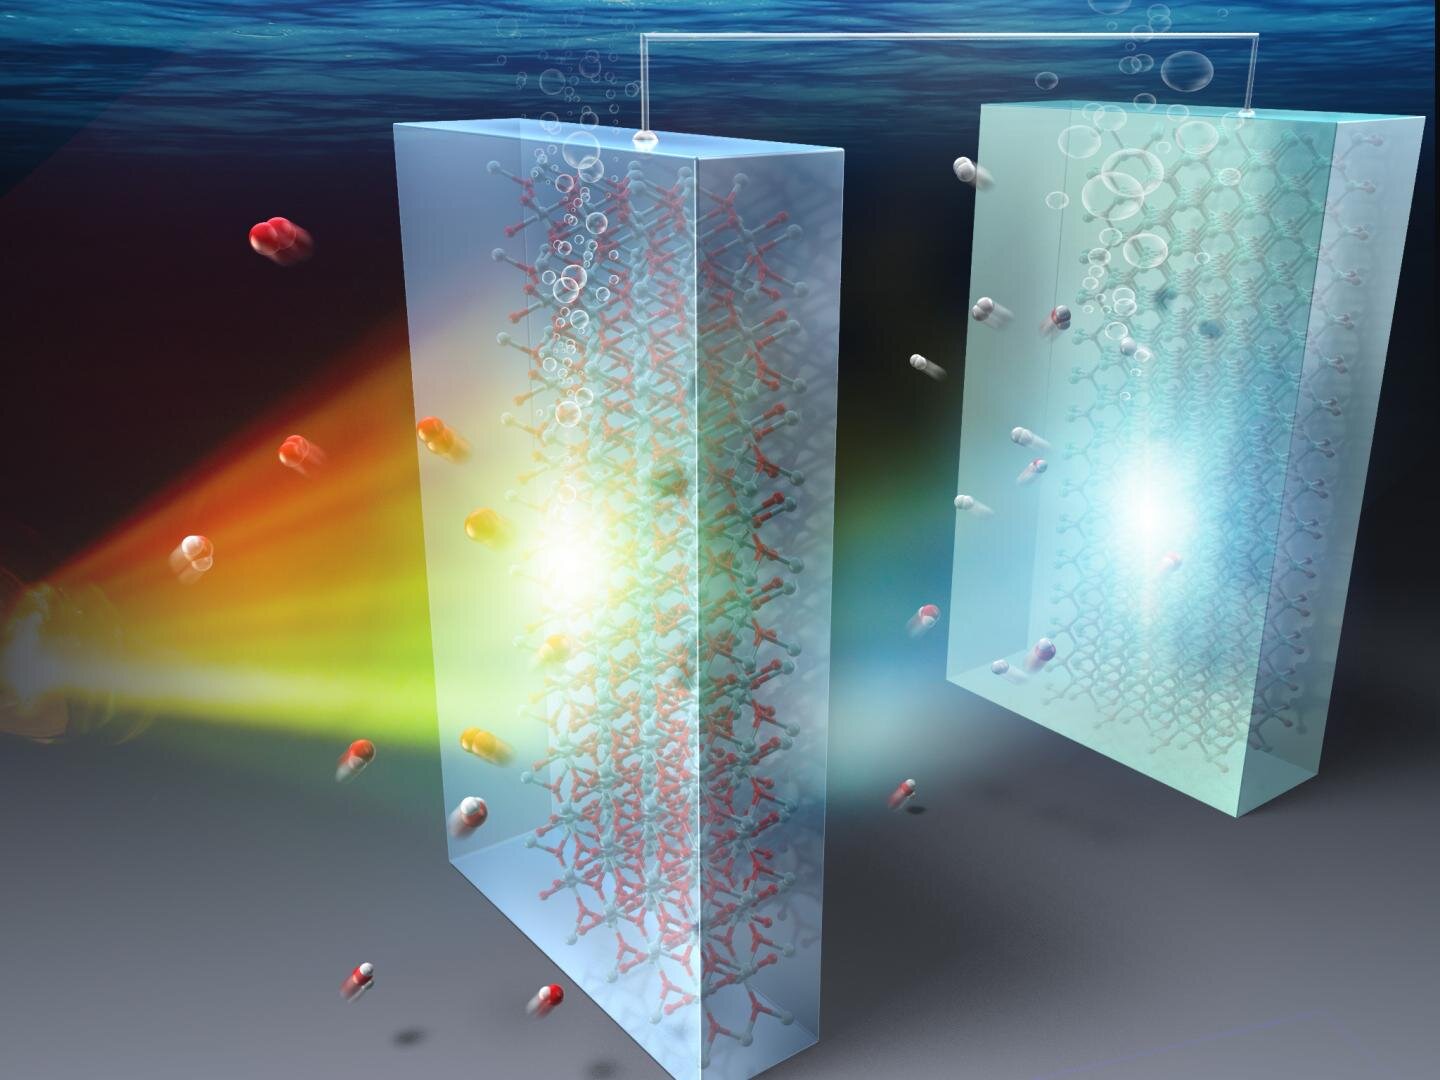 Giving a 'tandem' boost to solar-powered water splitting